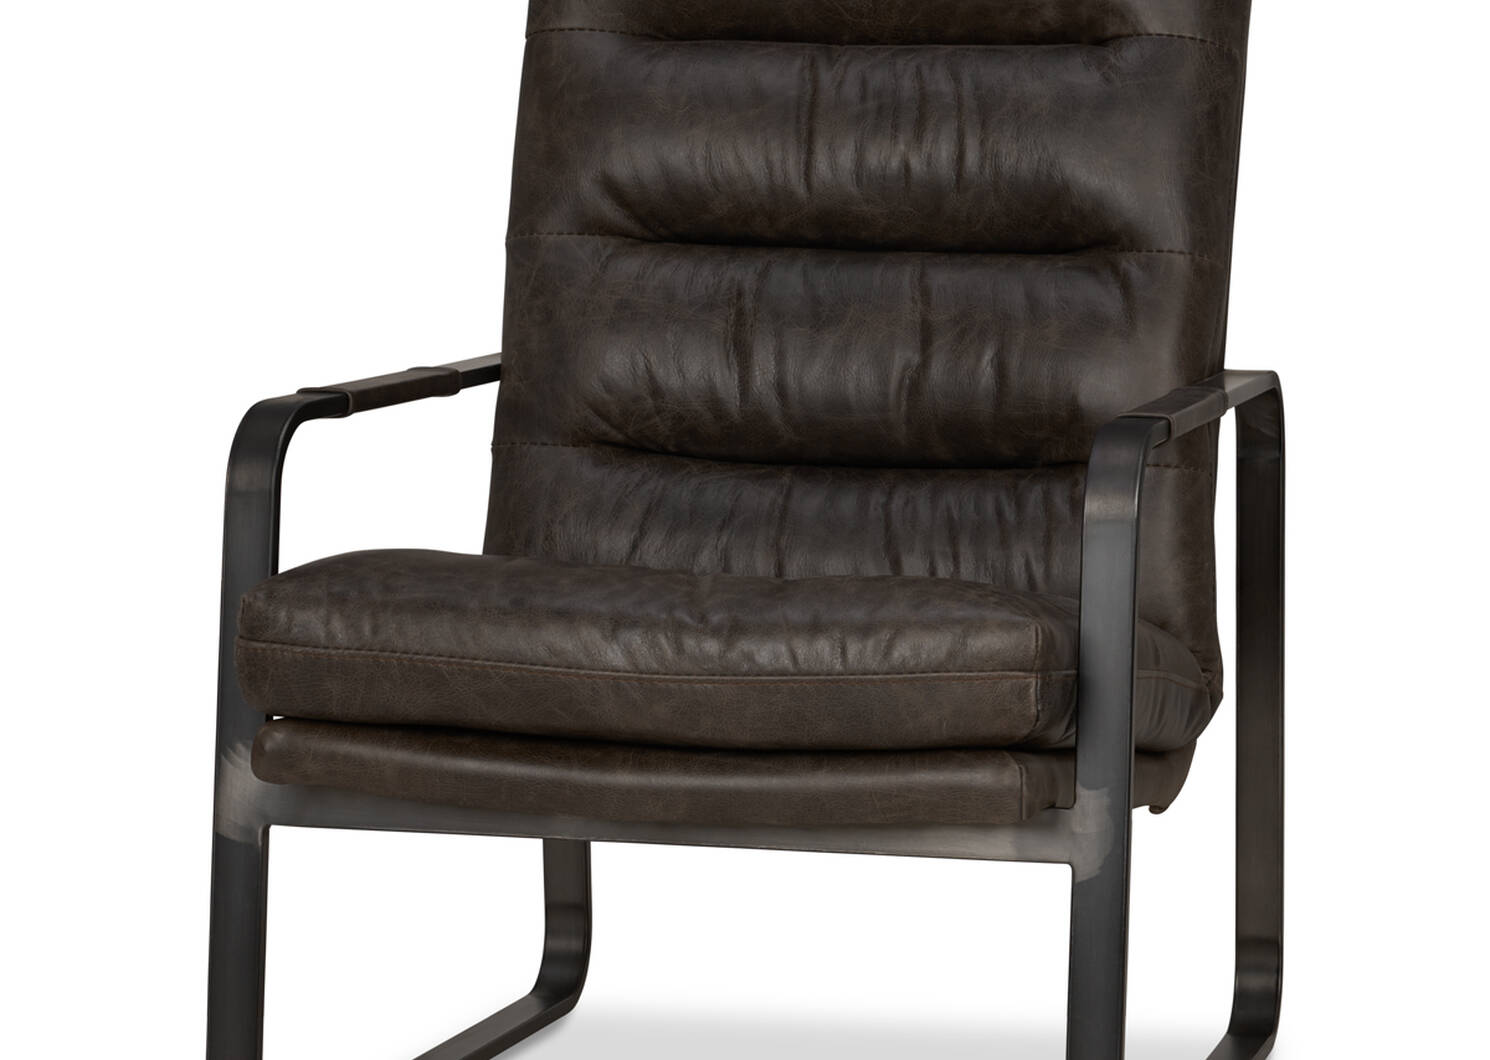 Donnelly Leather Armchair -Hurst Cocoa